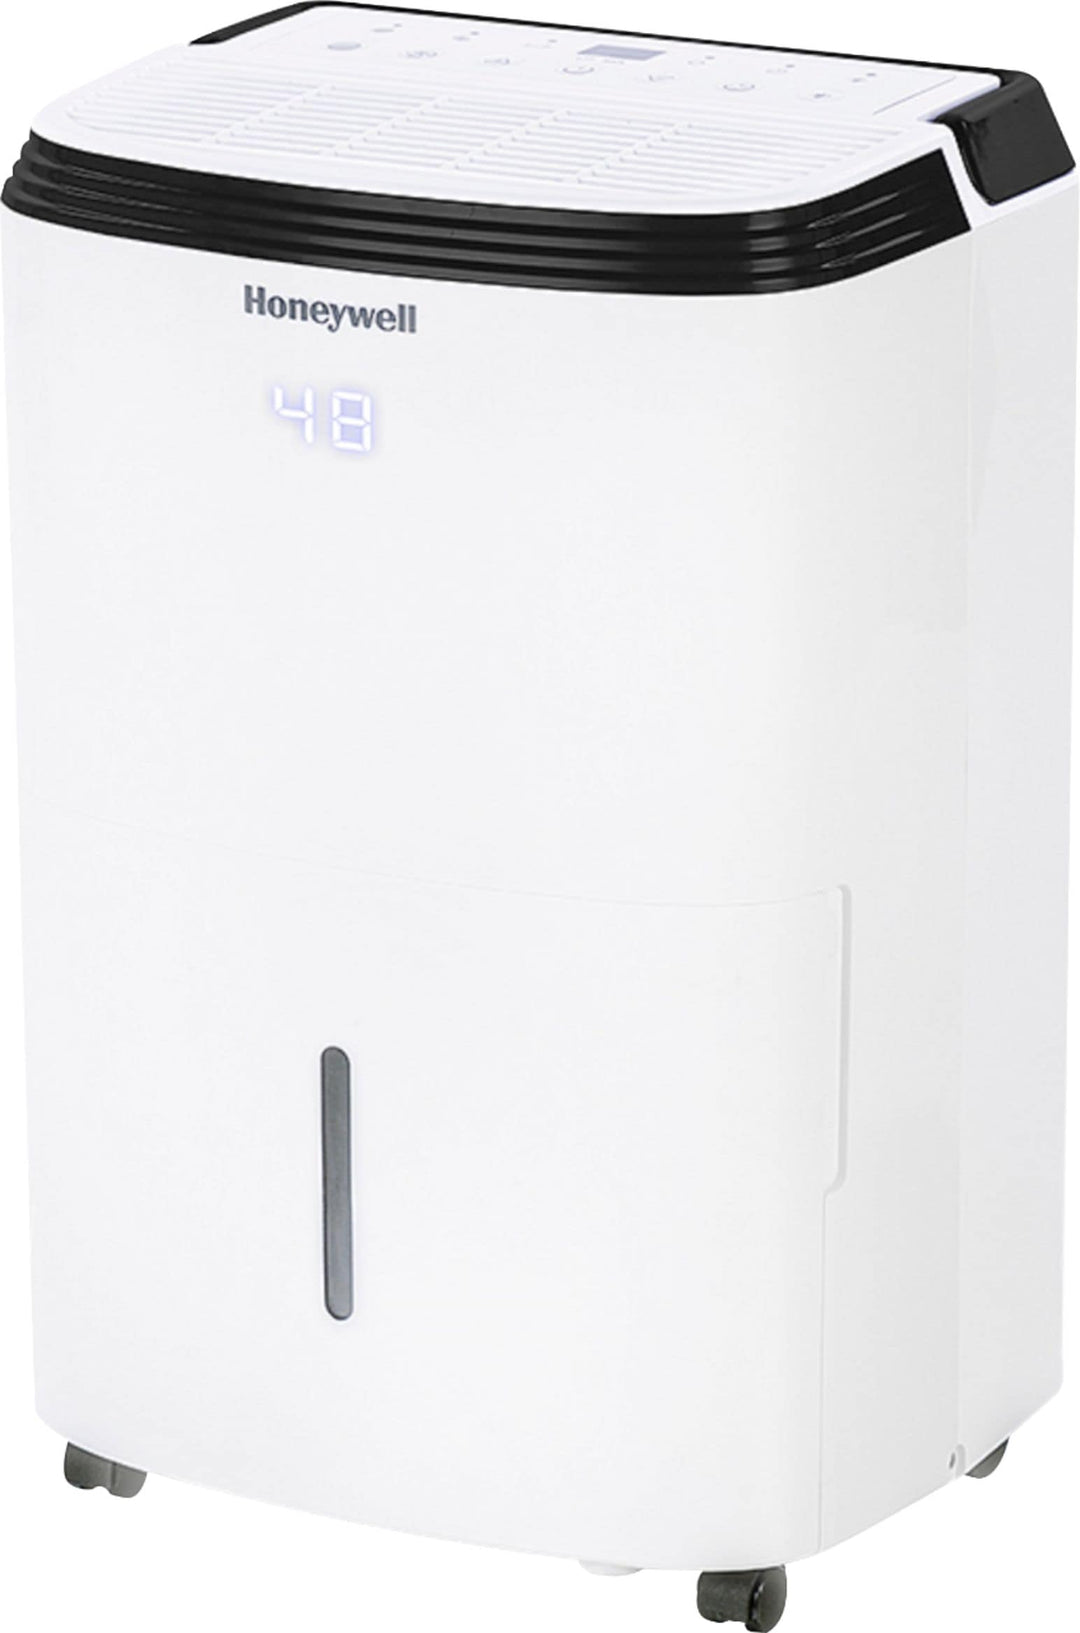 Honeywell - Smart WiFi Energy Star Dehumidifier for Basements & Rooms Up to 4000 Sq.Ft. with Alexa Voice Control & Anti-Spill Design - White_6